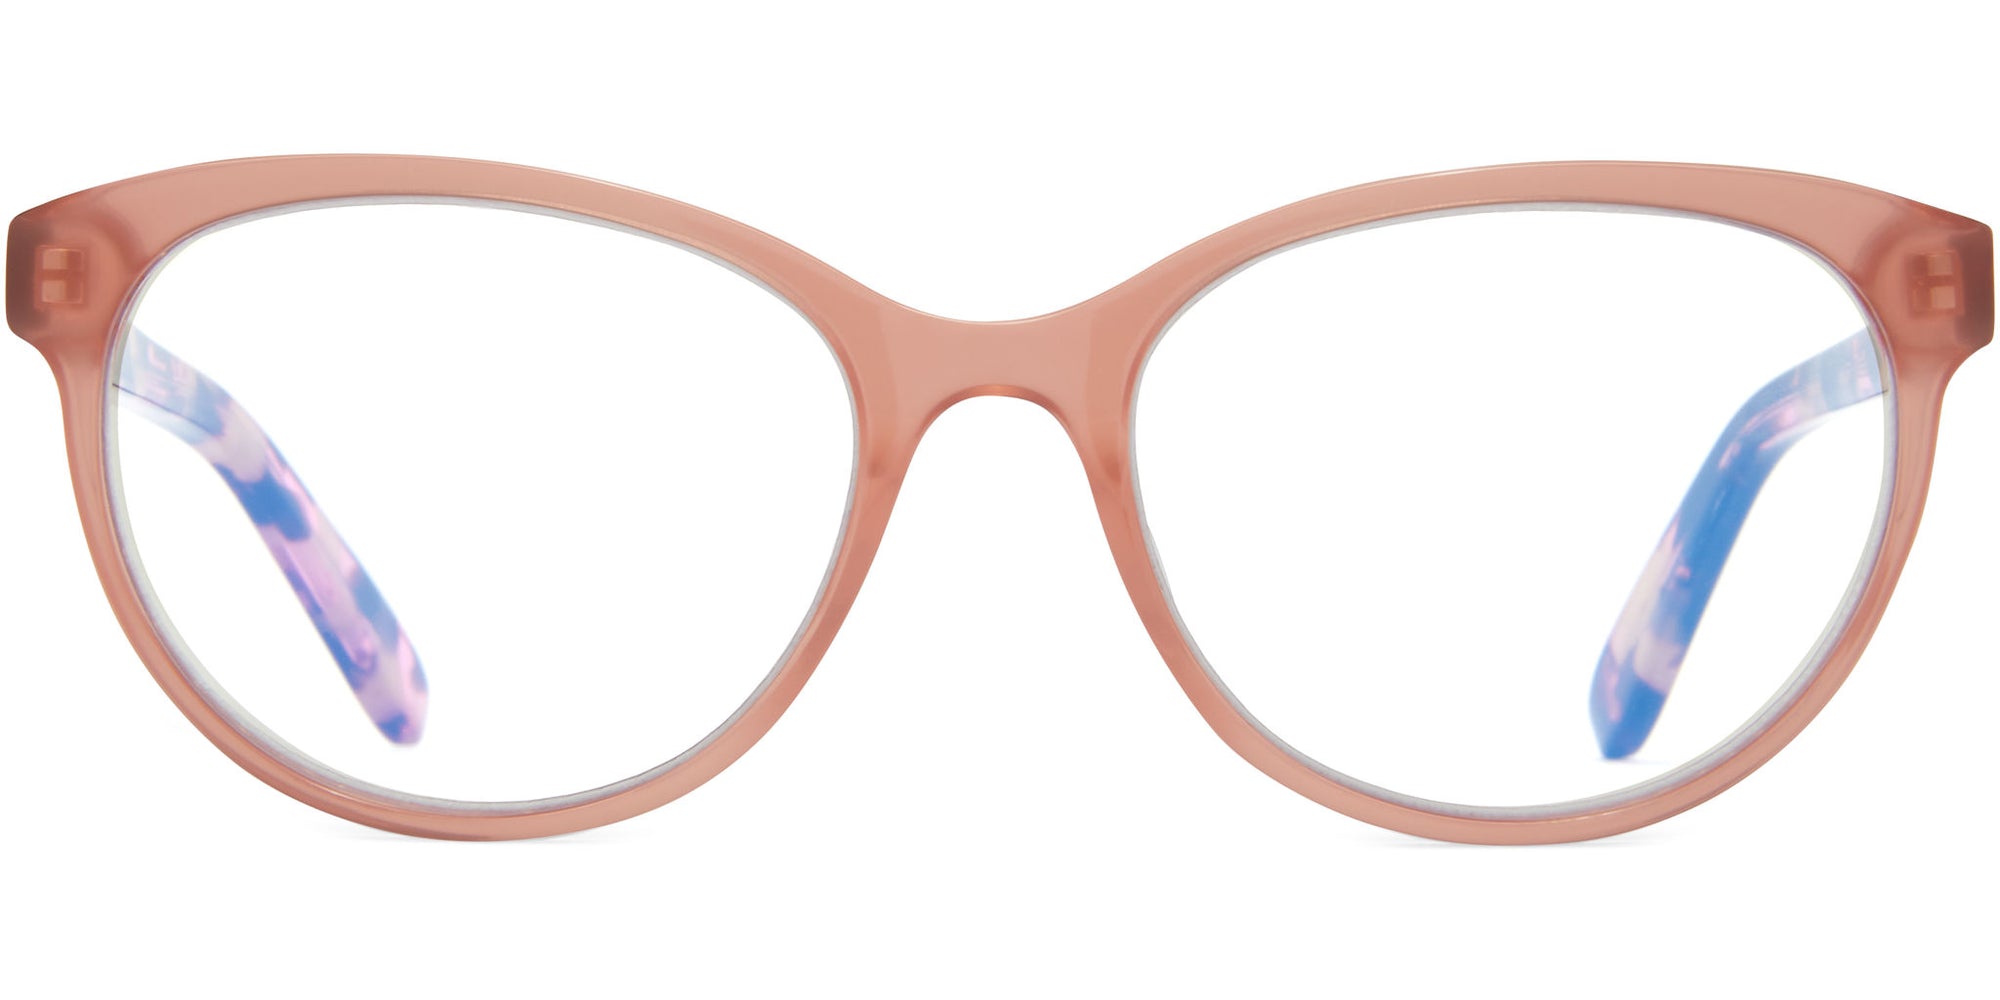 Signature Collection Readers - Willow - Pink/Tortoise / 1.25 - Blue Light Filtering Readers